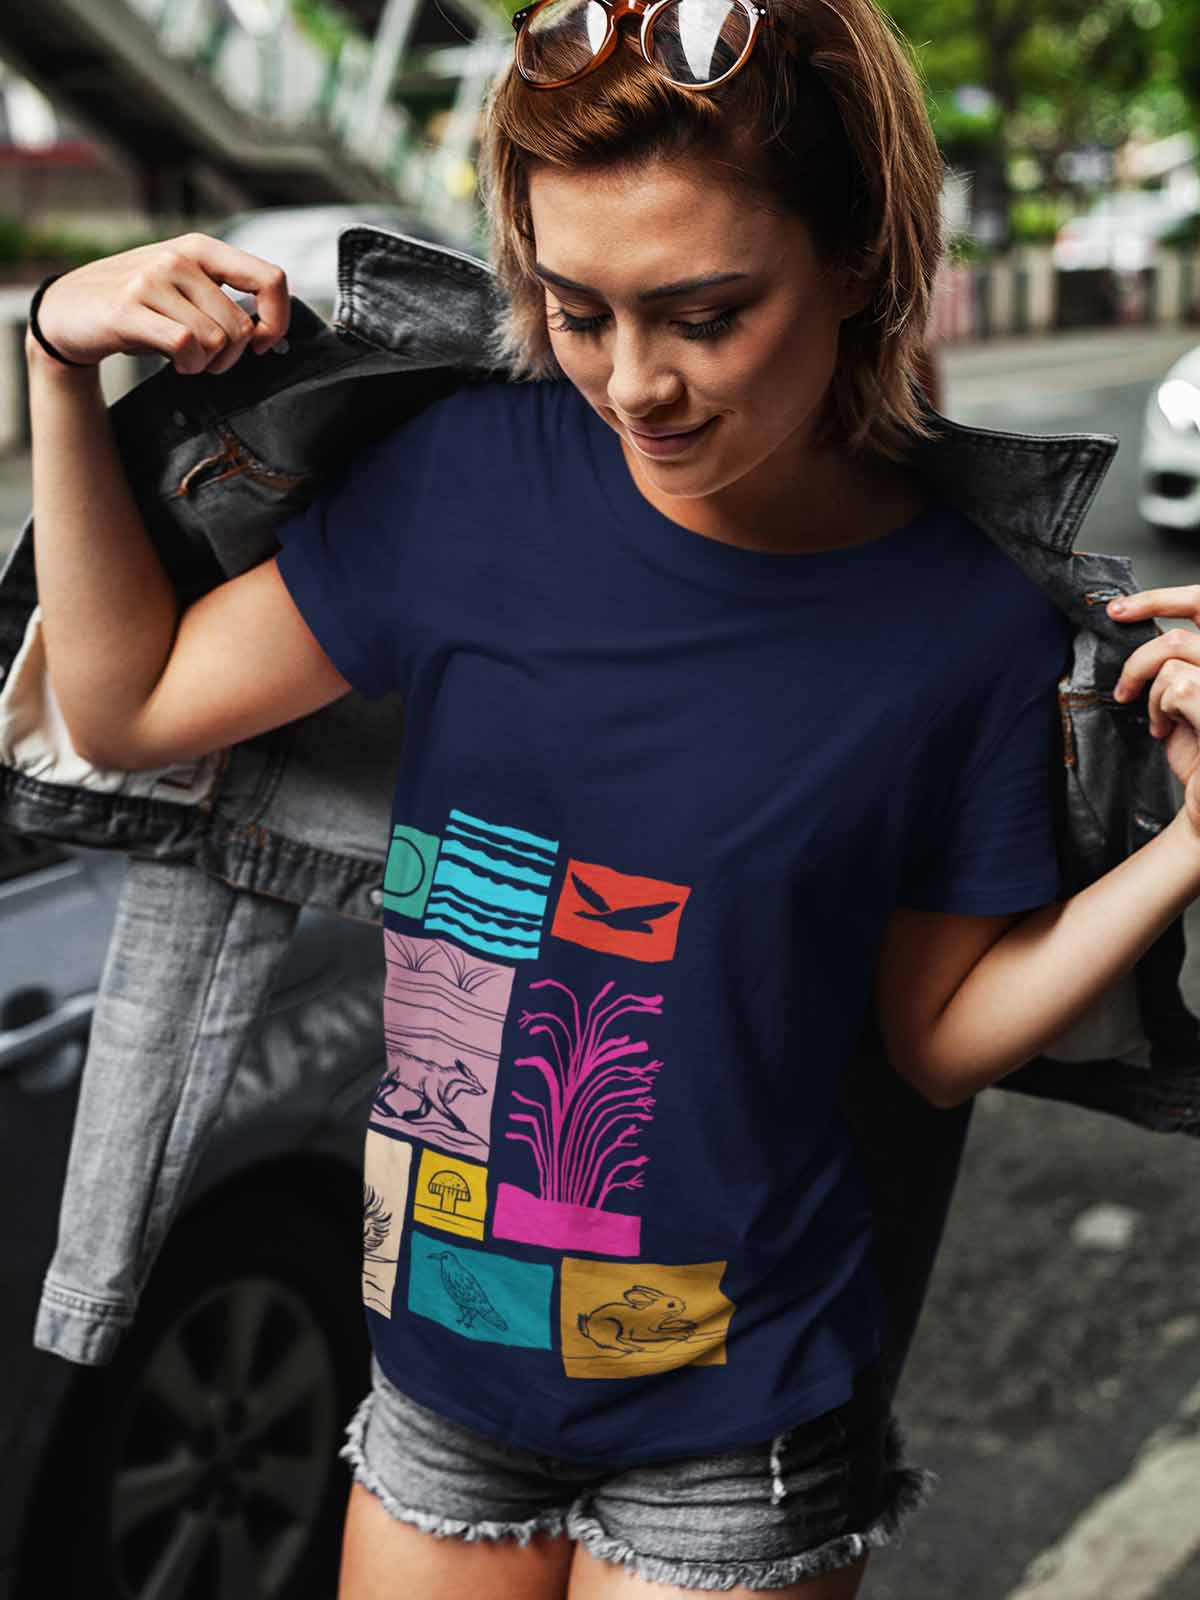 Raw-real-printed-t-shirt-for-women by Ghumakkad